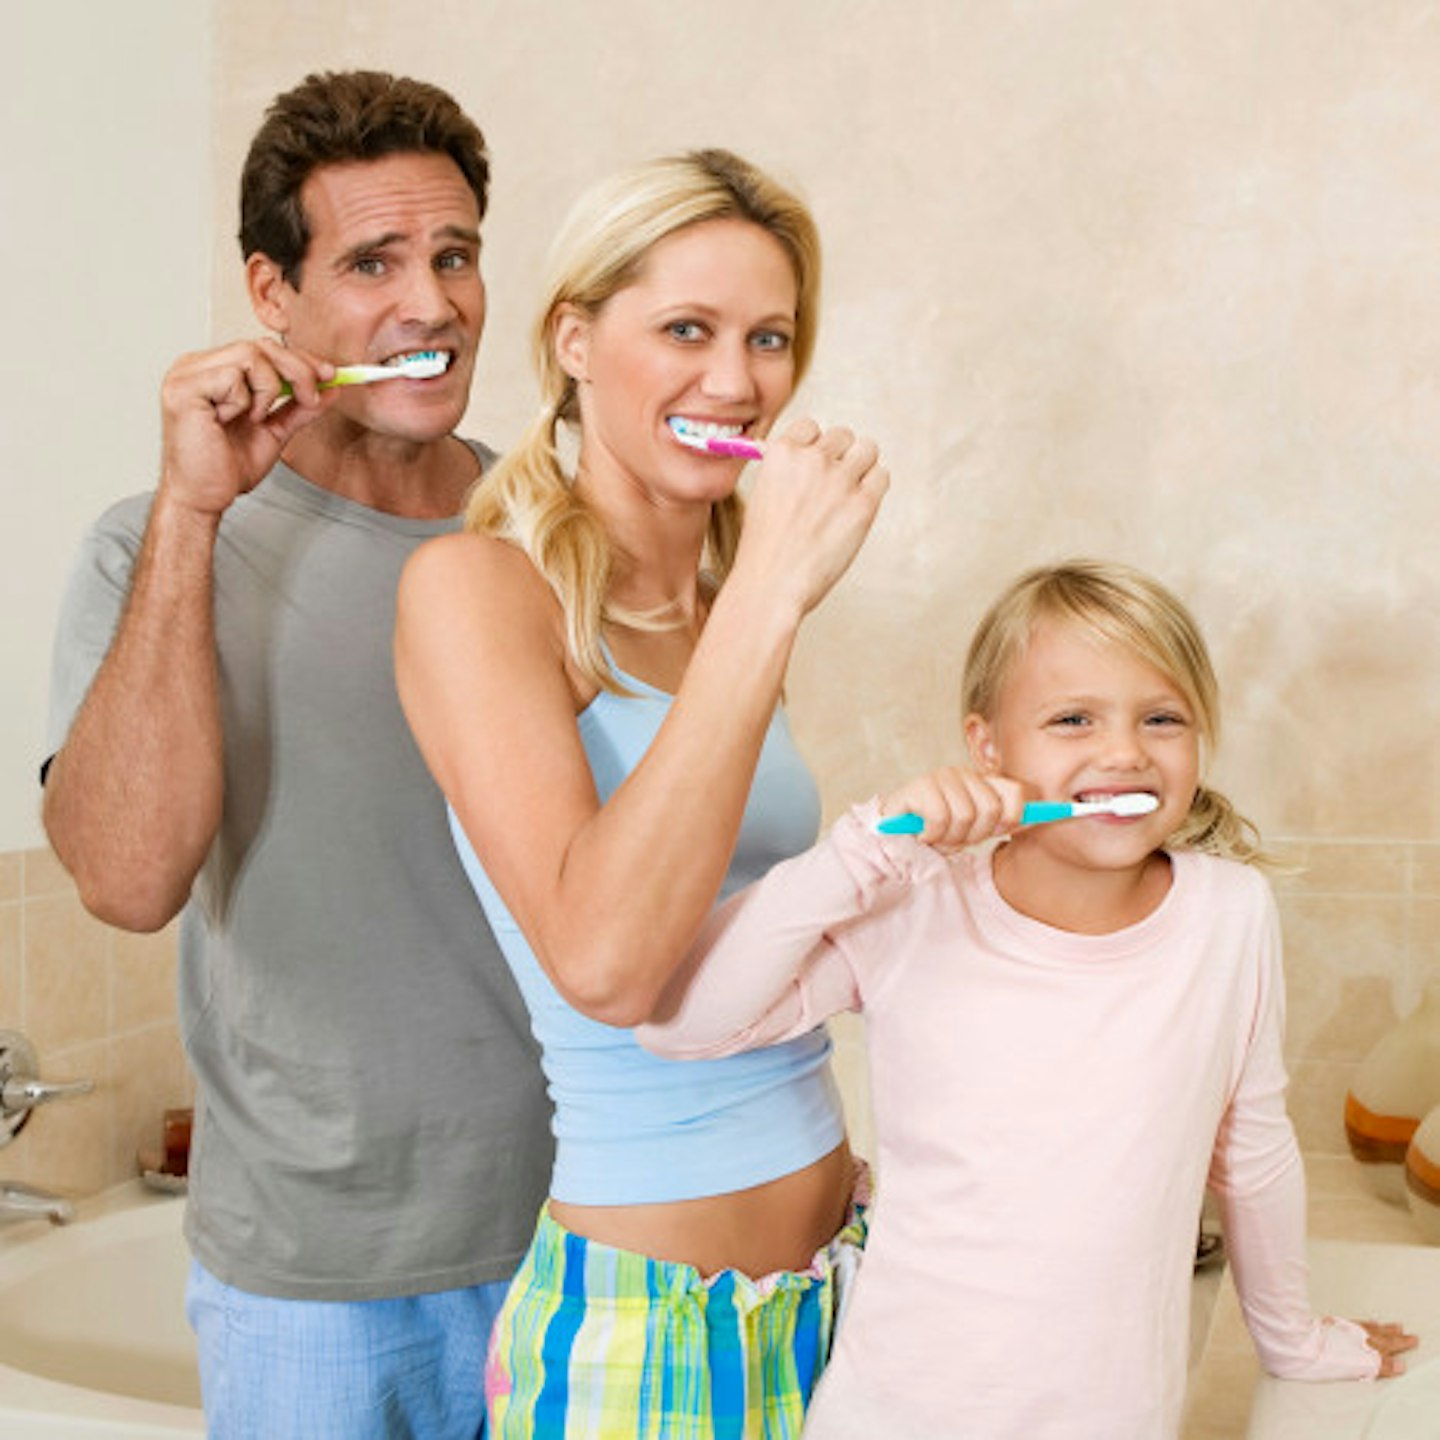 Make sure you start brushing early, to prevent trips to the dental hospital